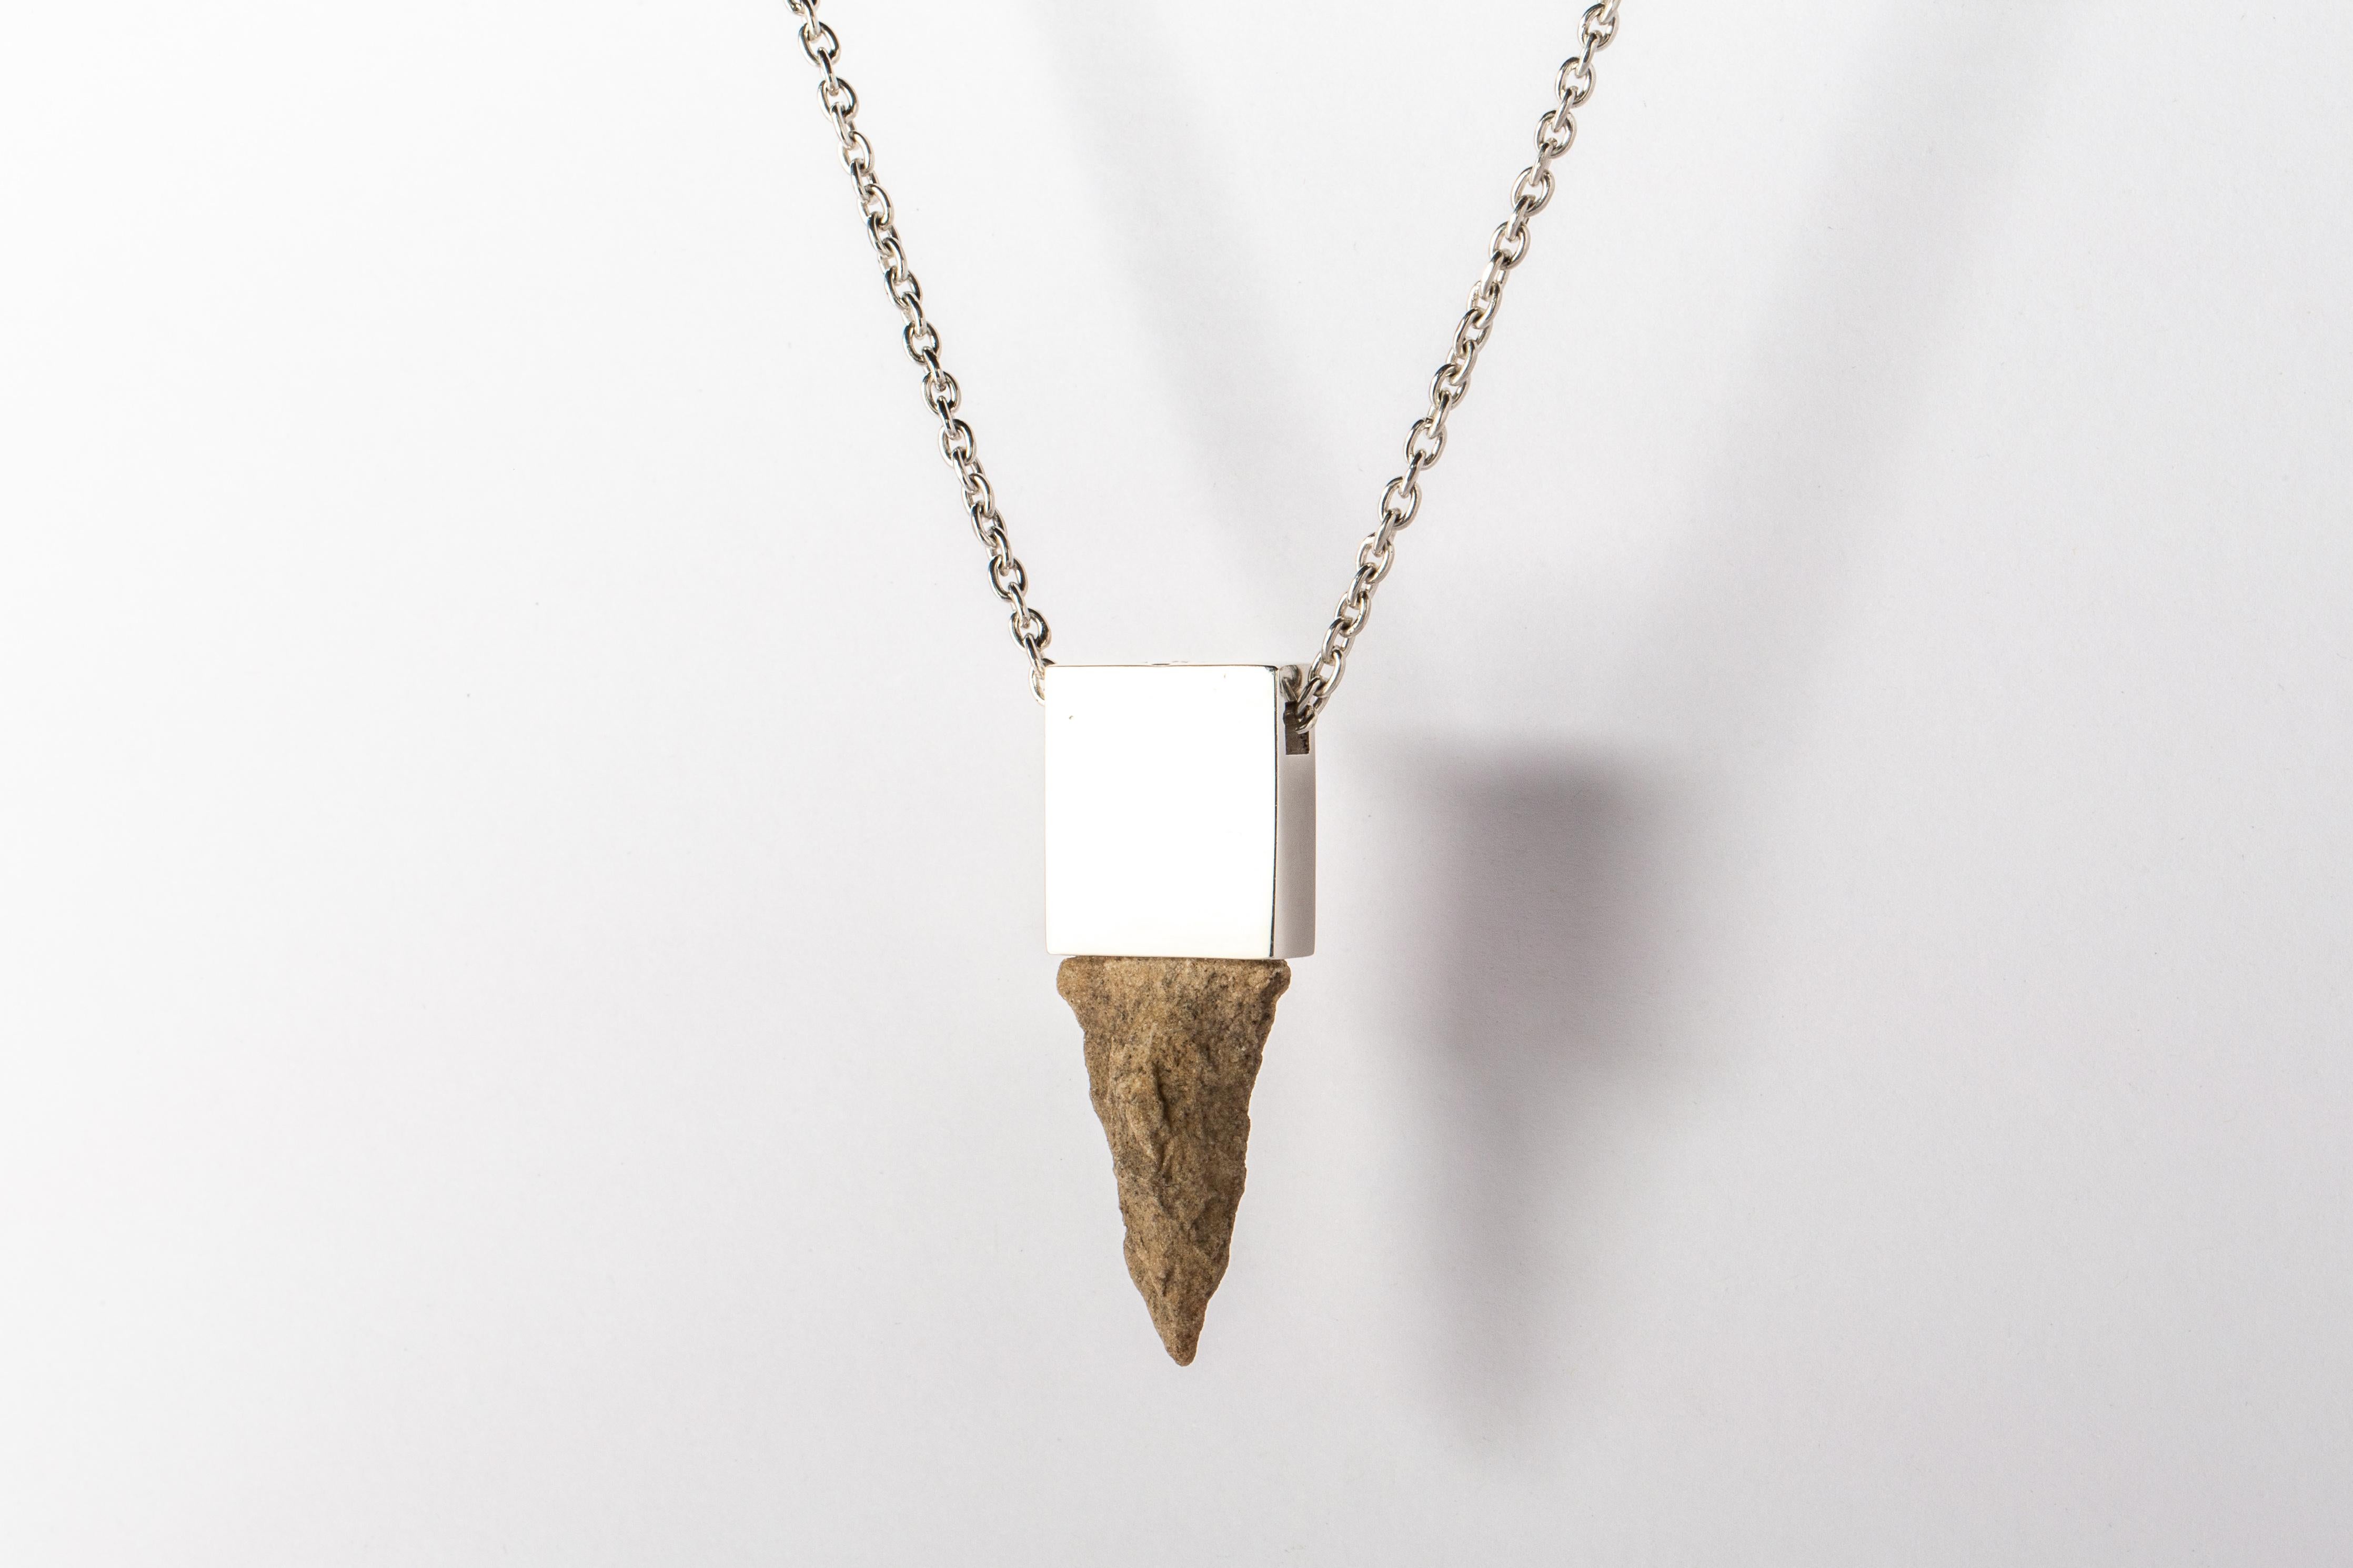 Necklace in the shape of cuboid made in polished sterling silver and a rough of arrowhead stone. It comes on 74 cm sterling silver chain.
These pieces are built using true arrowhead relics. Their wild history creates a depth and magic that is